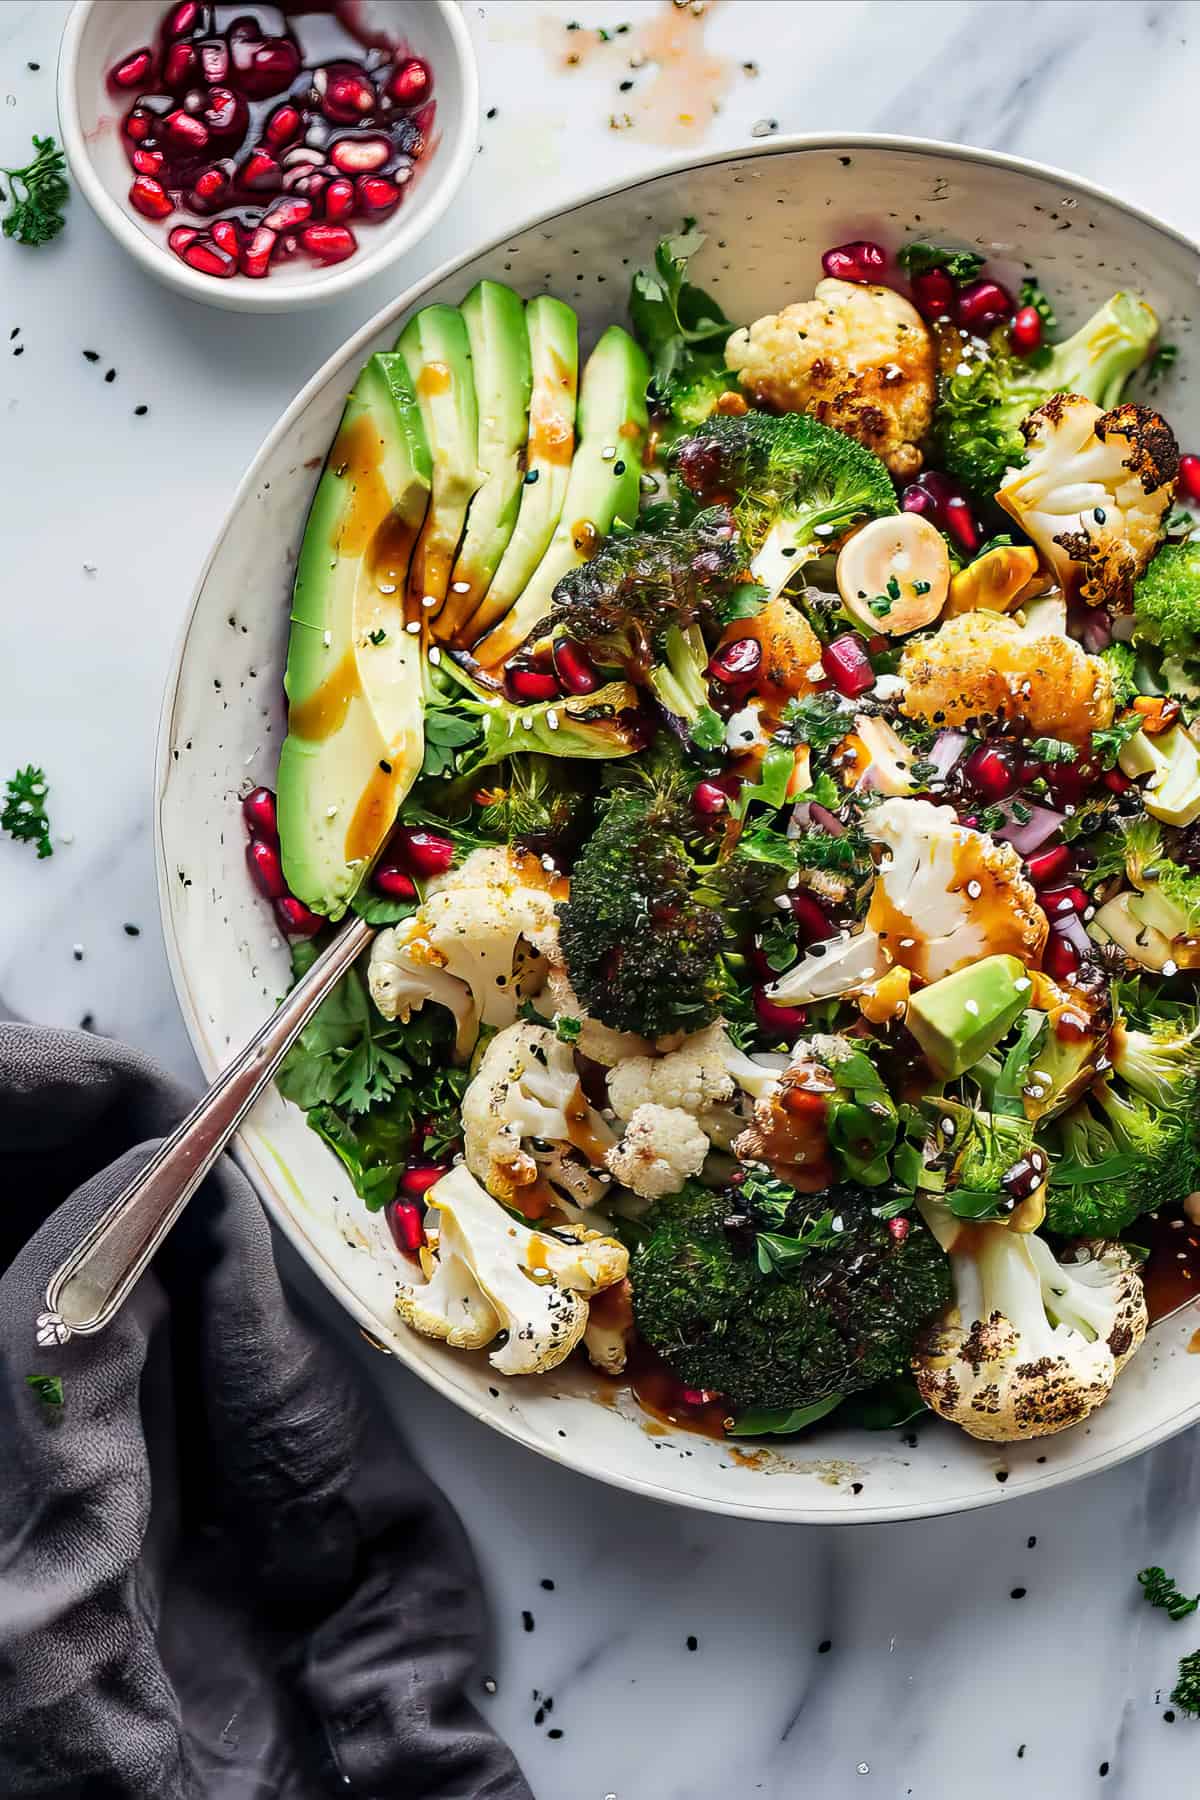 Warm roasted broccoli winter salad with vinaigrette dressing in a white bowl.